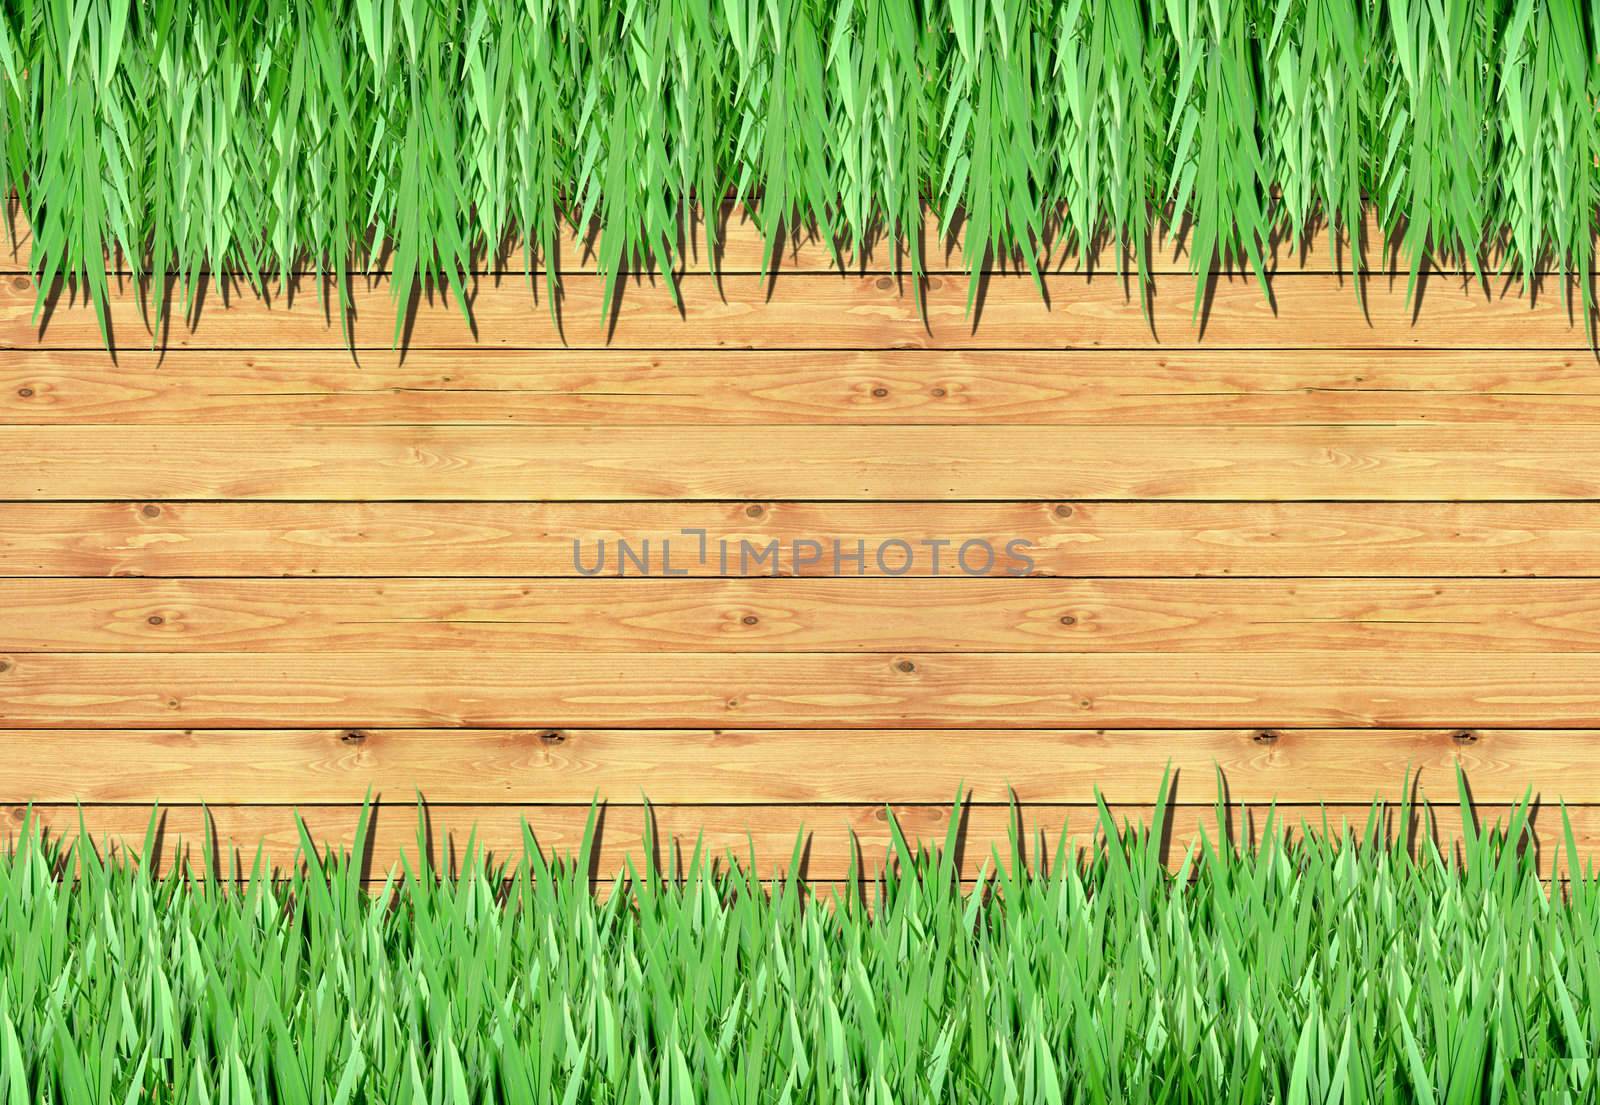 Grass, wood frame with the background by rufous